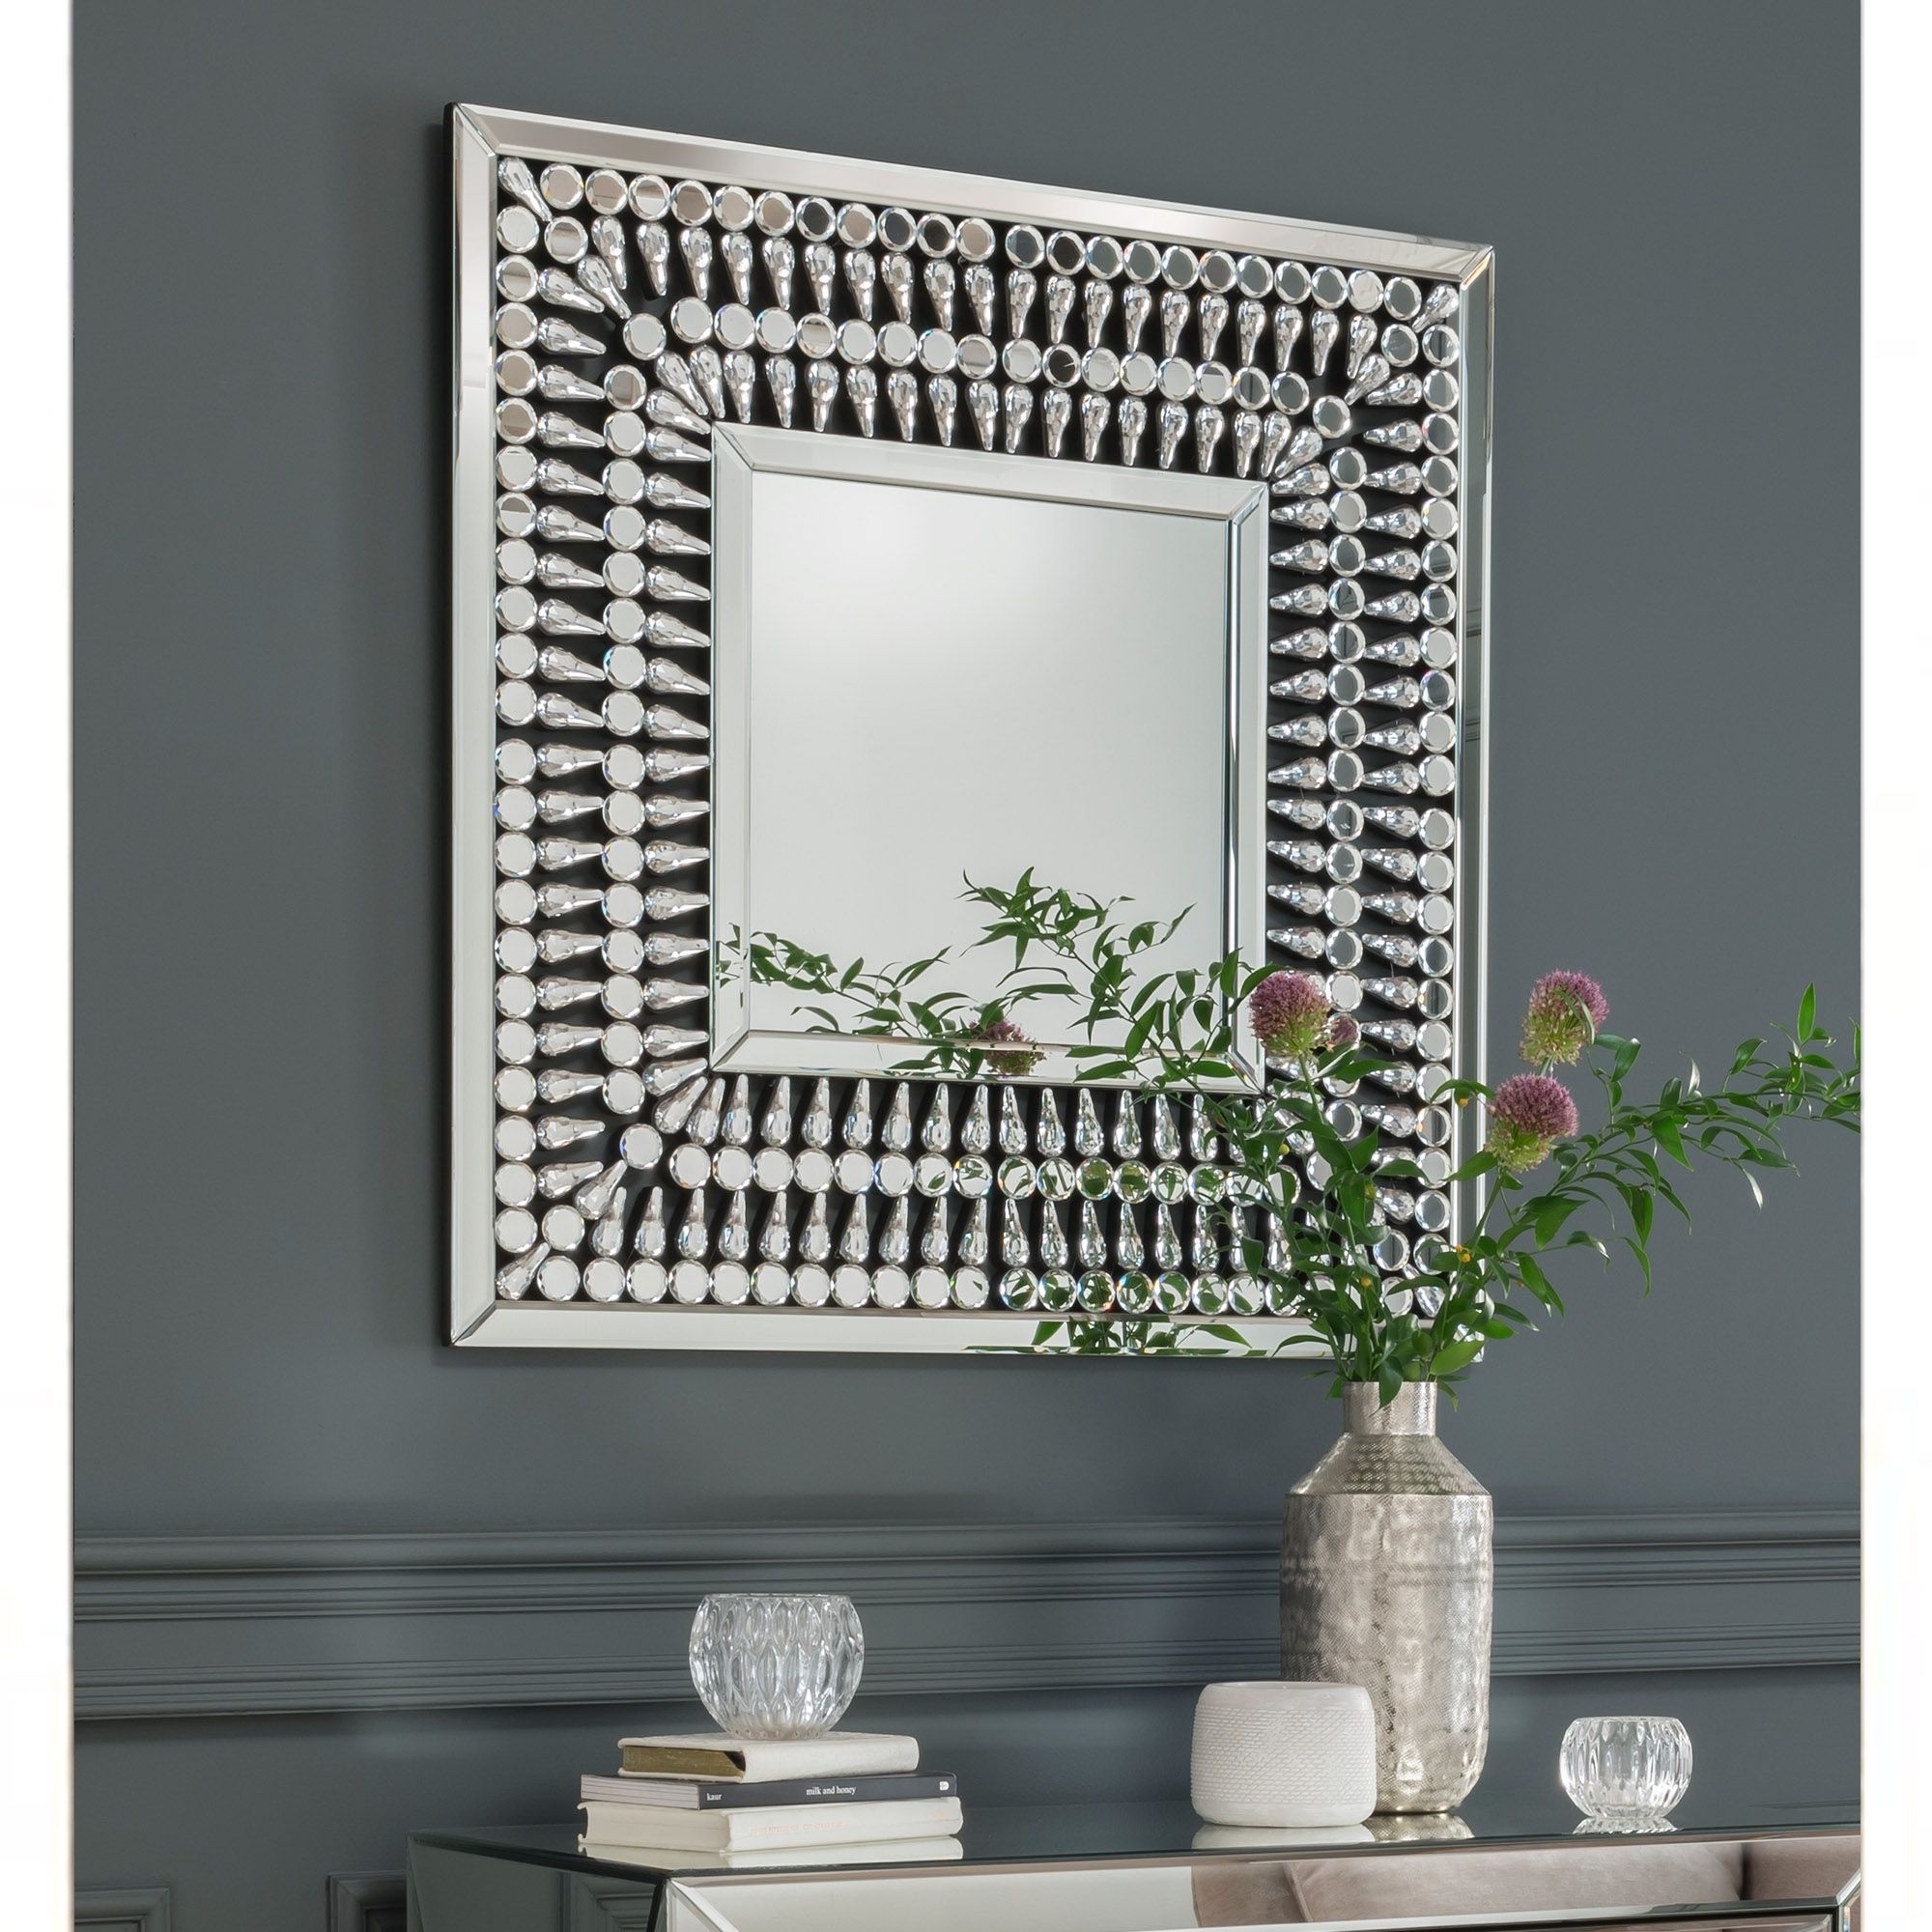 Crystal Mirrored Square Wall Mirror | Wall Mirror | Homesdirect365 Regarding Square Oversized Wall Mirrors (View 7 of 15)